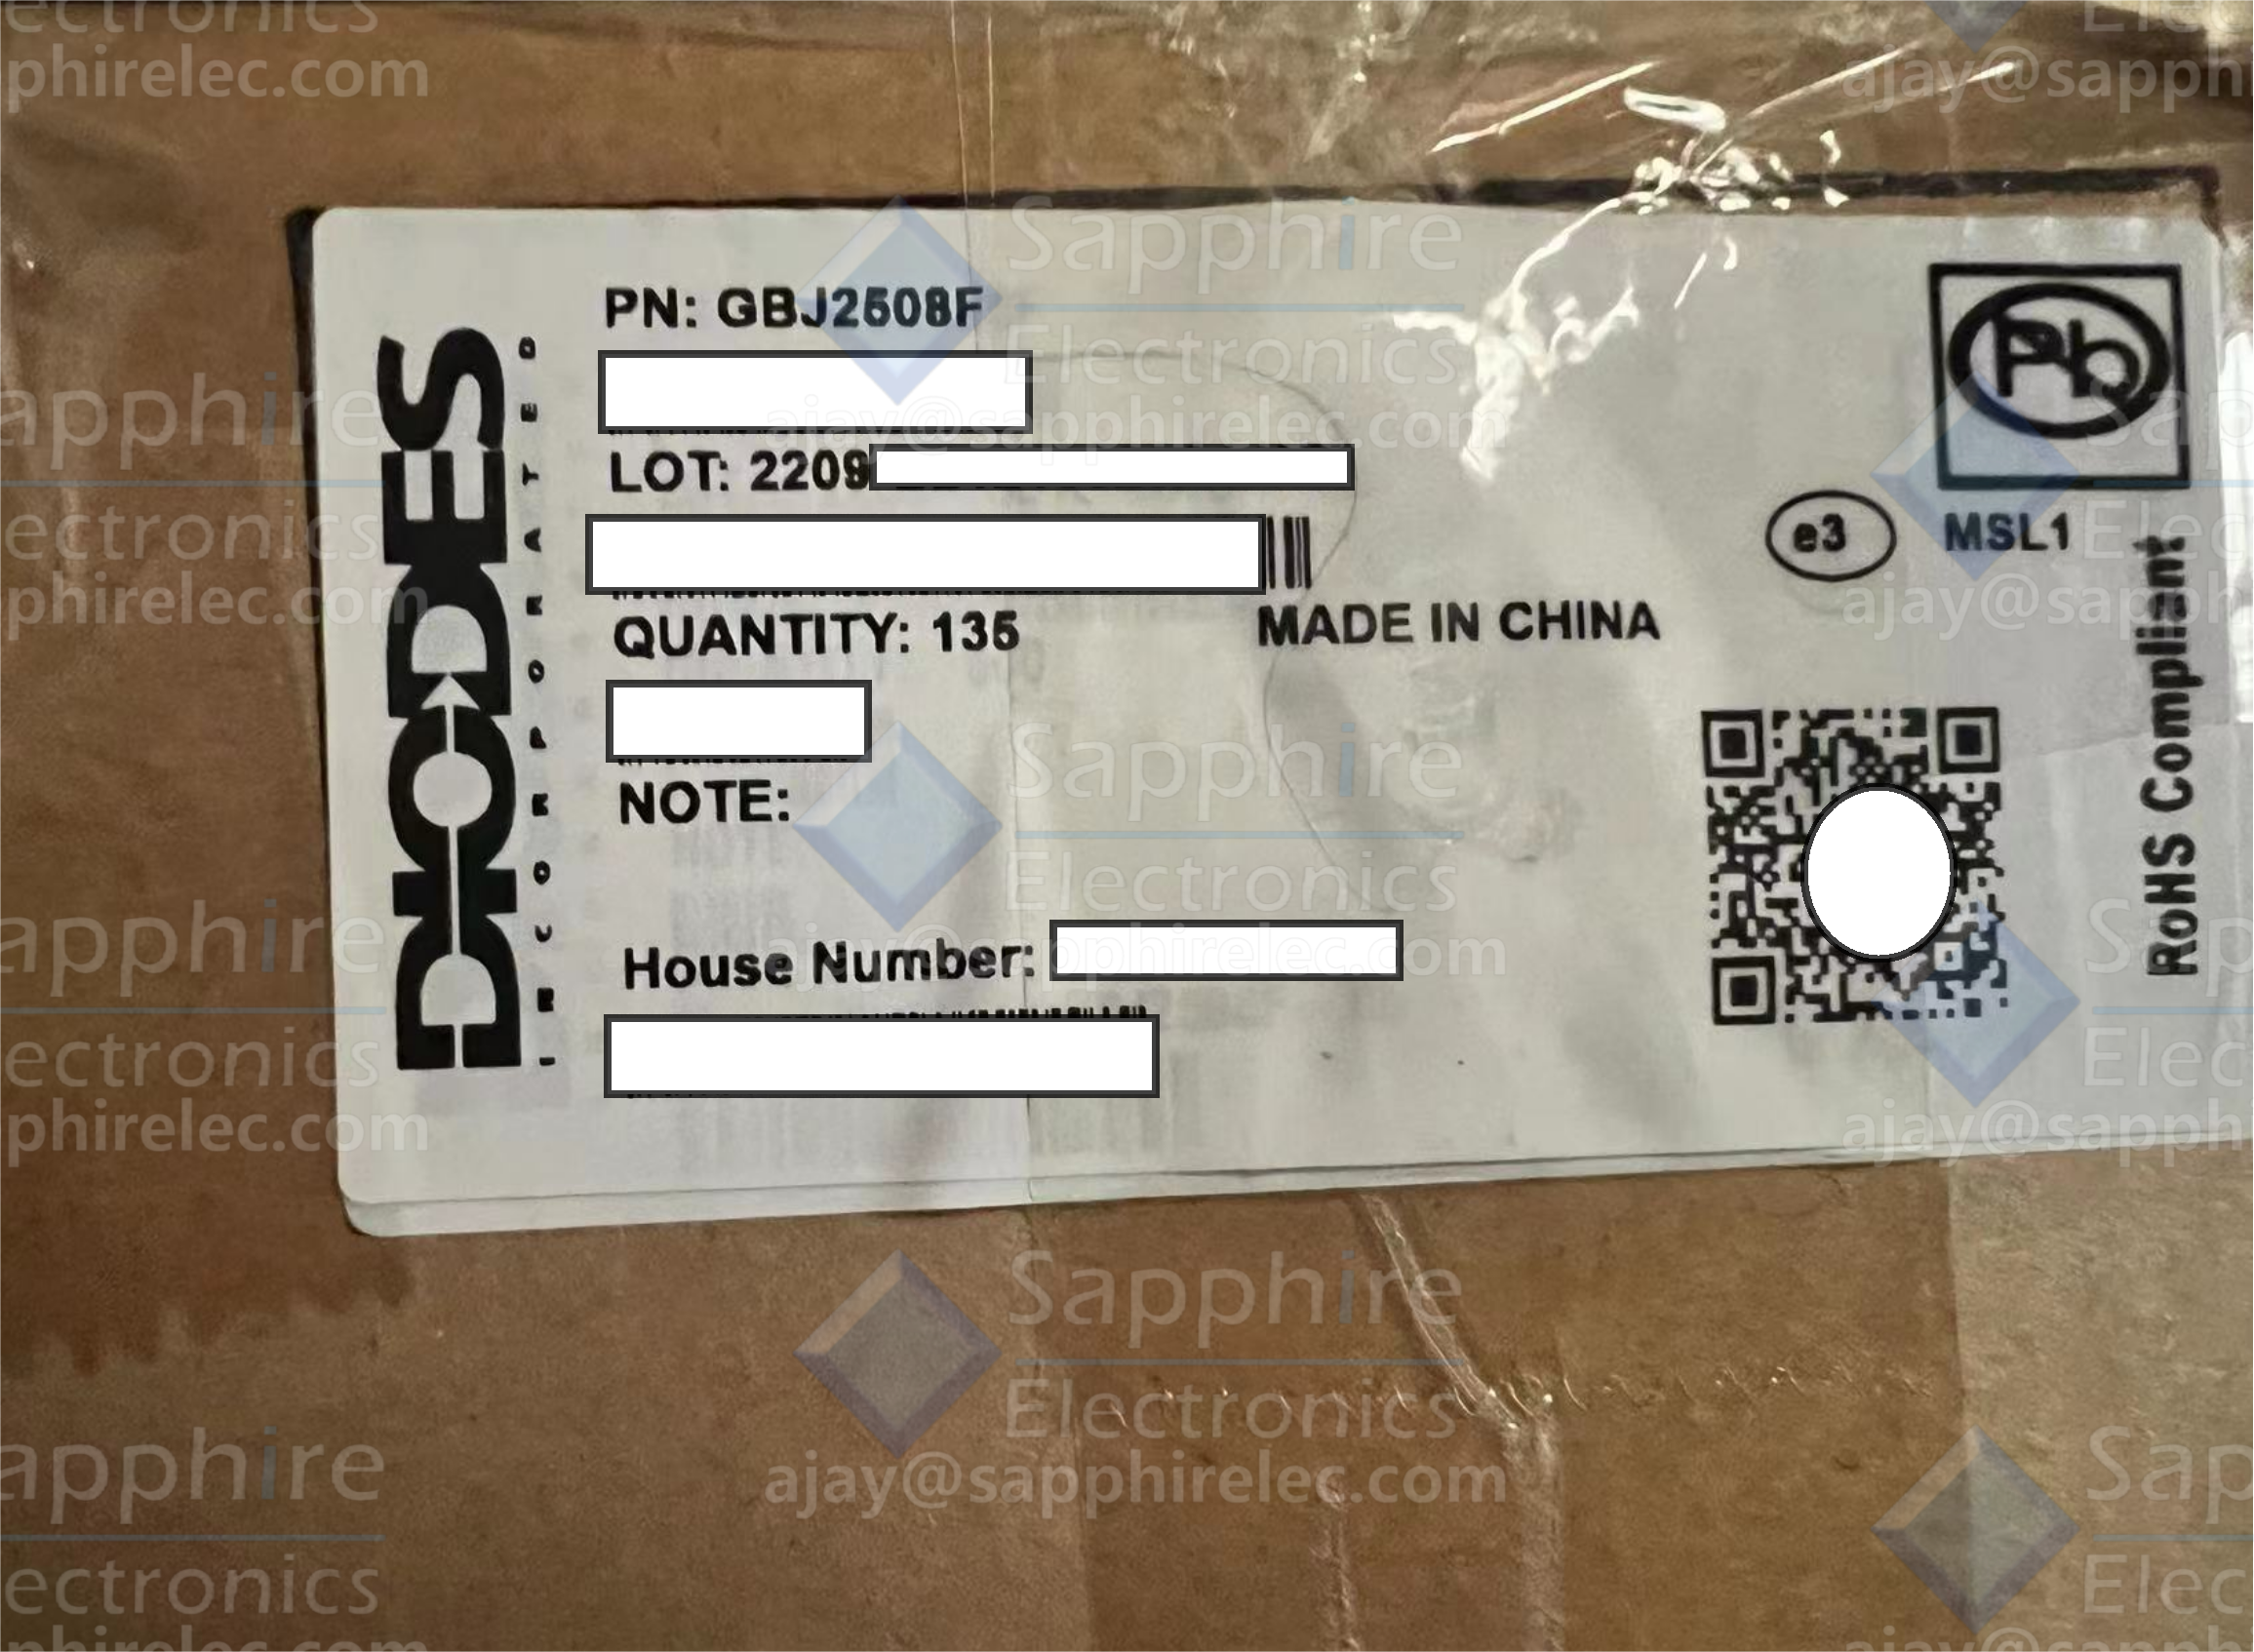 MADE IN CHINA

|
o
oN
~
Fa
Oo

House Number: bohirelac.d

PN: GBJ2608F
L

QUANTITY: 136
NOTE:

e 8 4 WV w © « Ww © &gt; &amp; 1%

SACTHG